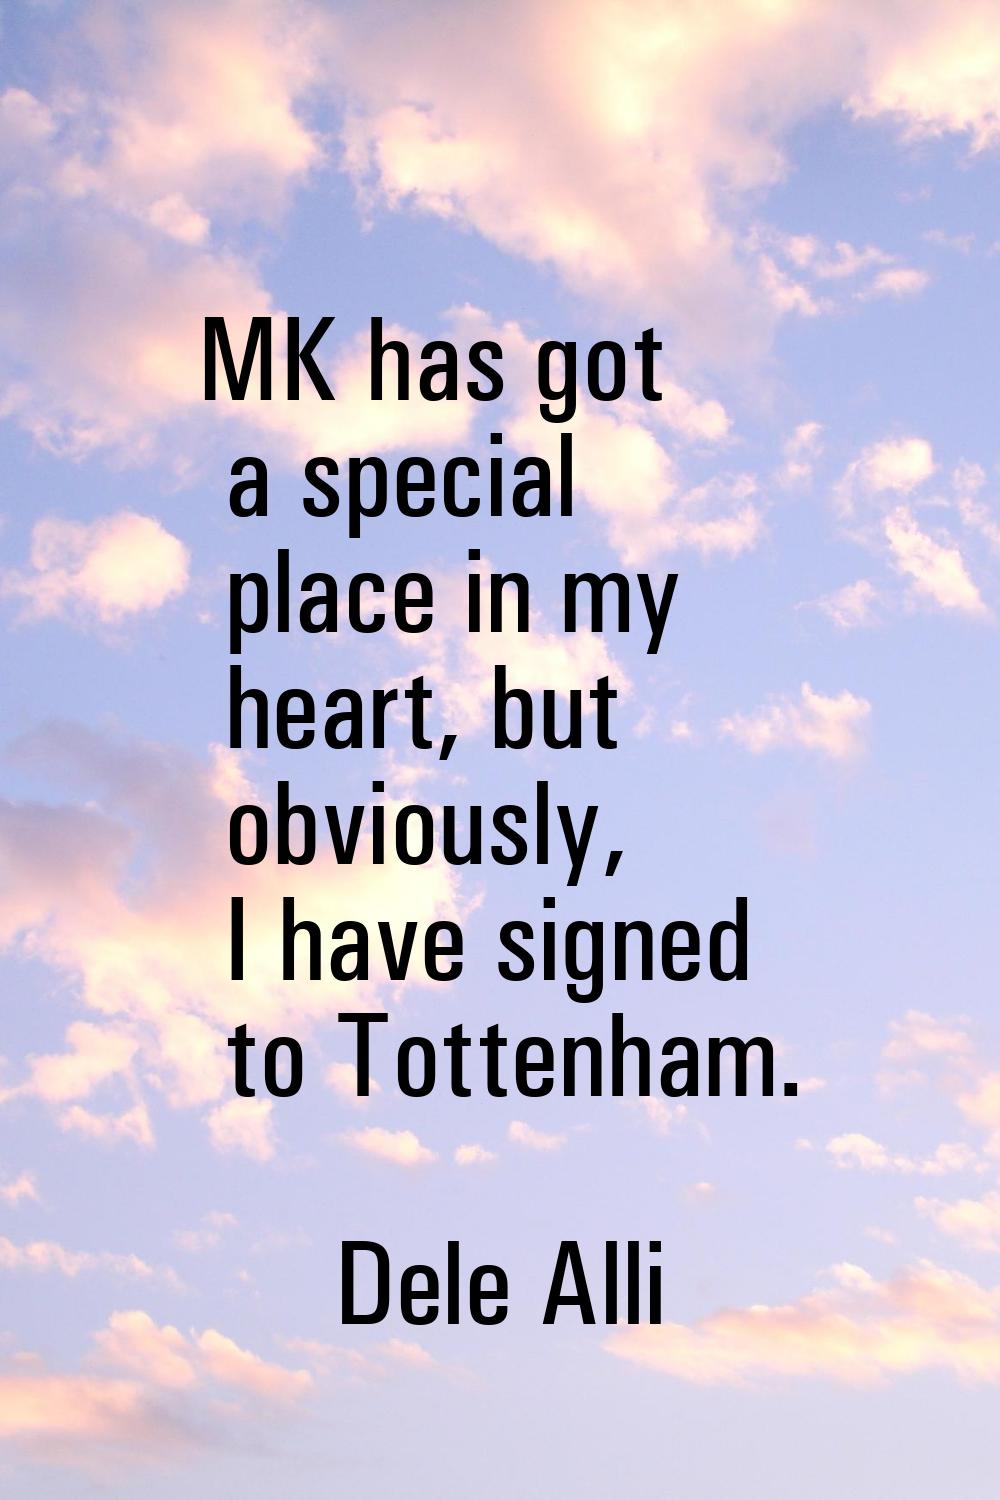 MK has got a special place in my heart, but obviously, I have signed to Tottenham.